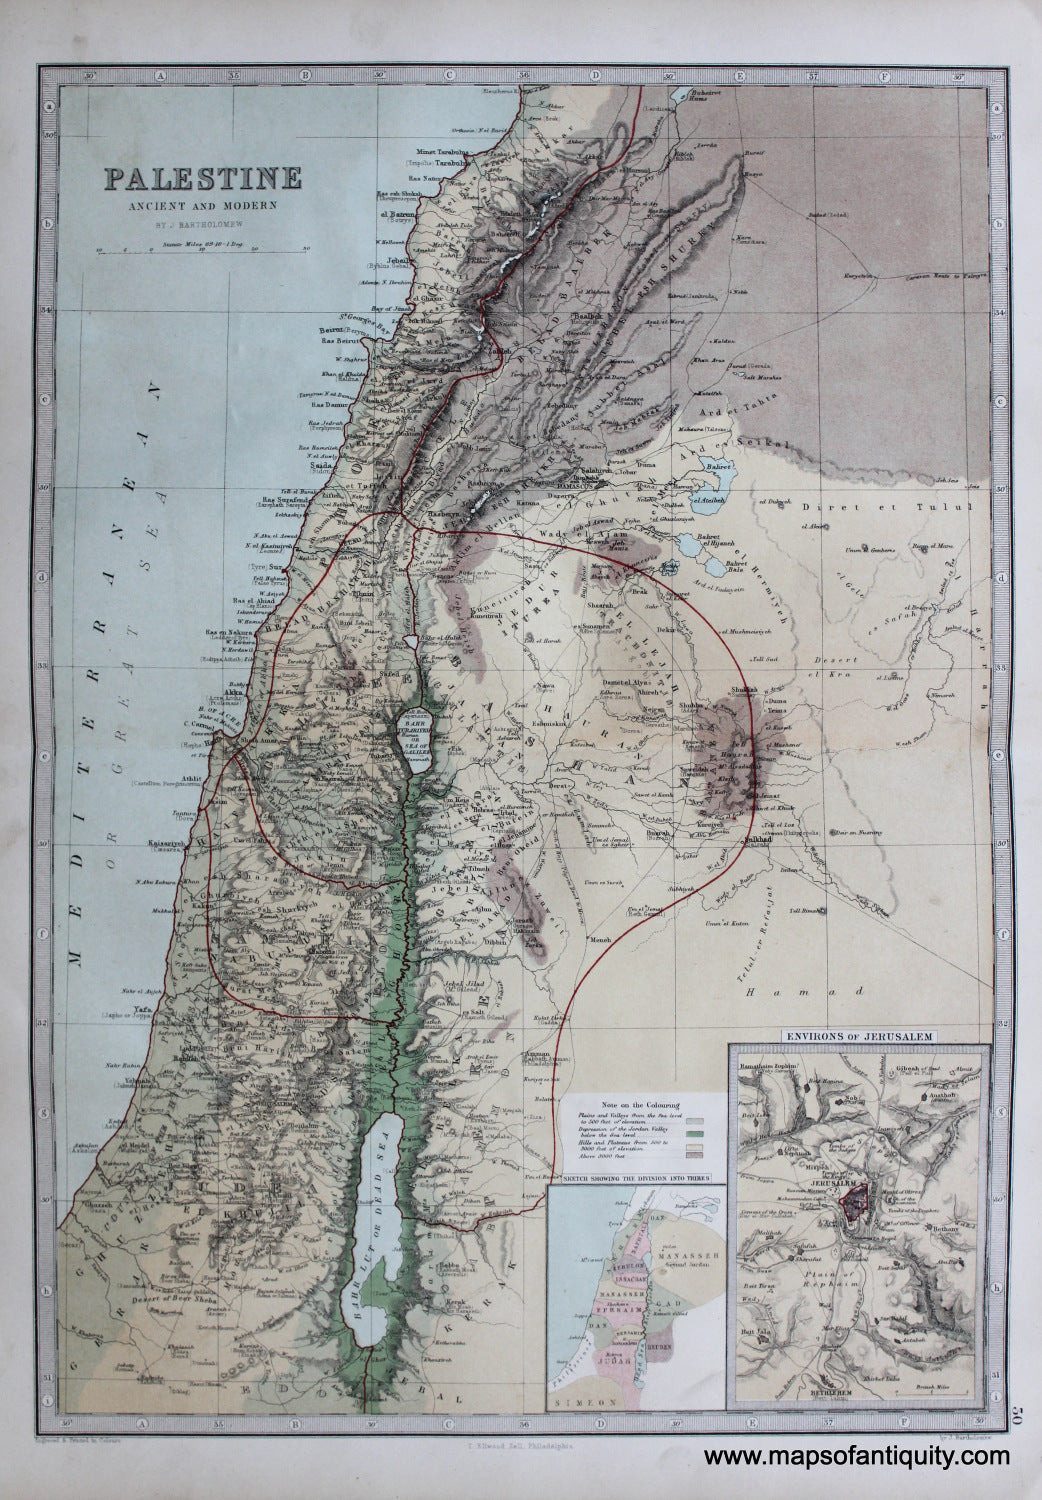 Antique-Printed-Color-Map-Palestine-Ancient-and-Modern-**********-Middle-East-&-Holy-Land--1873-J.-Bartholomew-Maps-Of-Antiquity